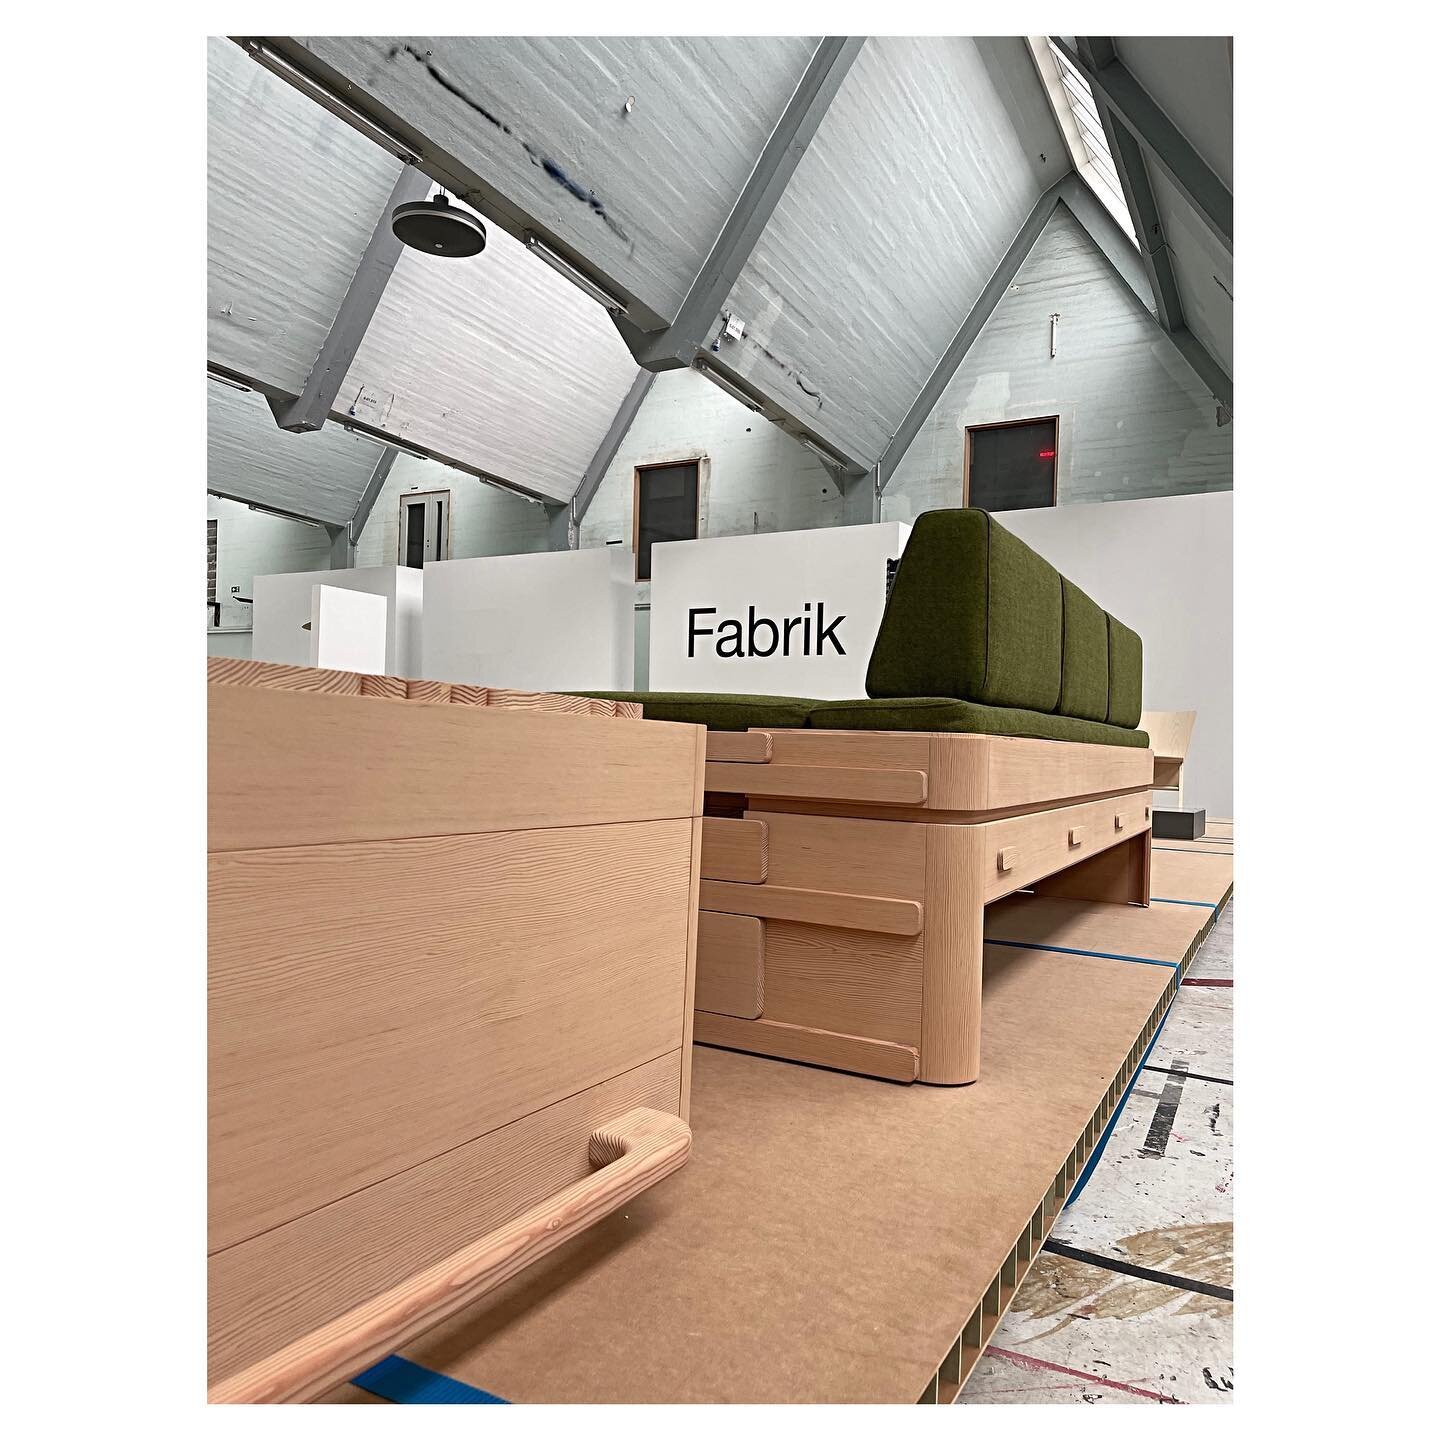 Last week to come and see the exhibition &ldquo;Fabrik&rdquo; at @fabrikkenffkd the last day will be on Sunday 6th November. 
- 
-

 &ldquo;A Lifetime&rdquo; furniture is made together with carpentry @antonballeas and upholstery Helle Ohnemus for exh